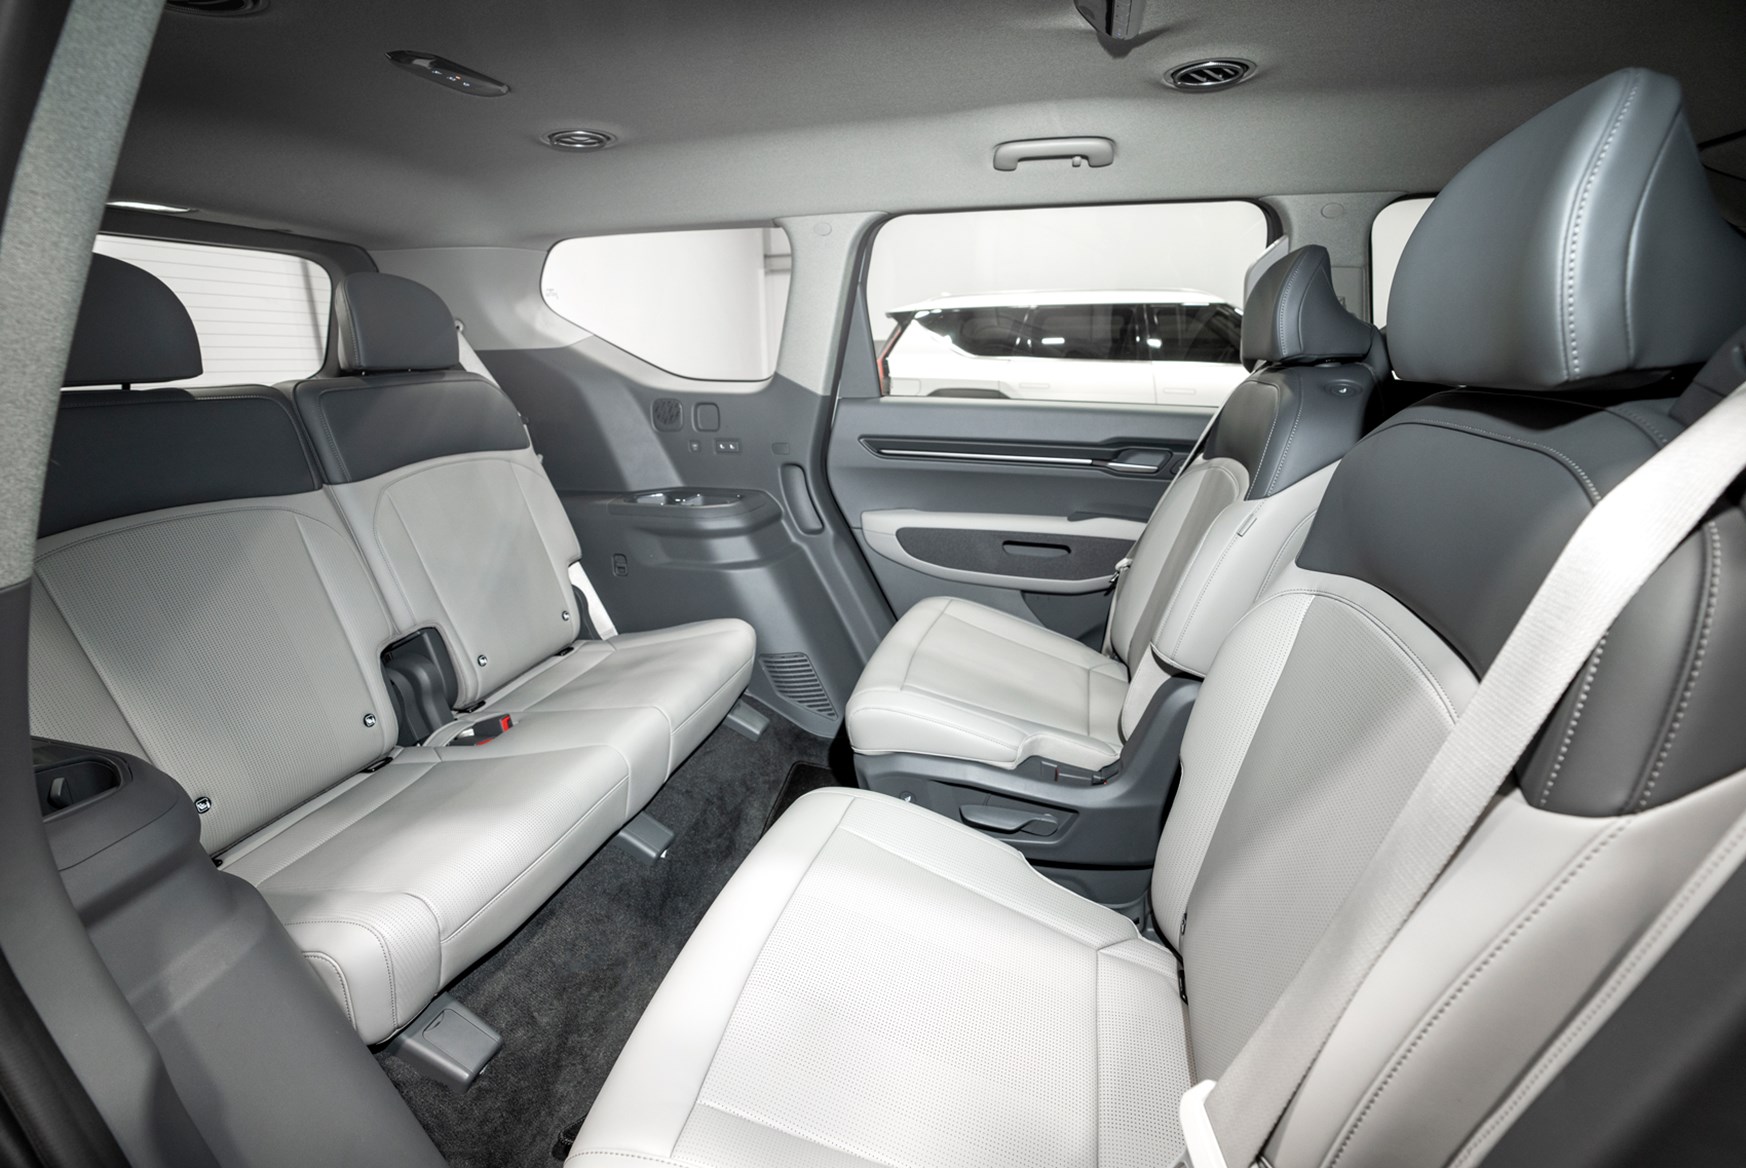 Kia's bold electric SUV that will seat seven: Seats swivel and recline so occupants can relax and chat while charging en route